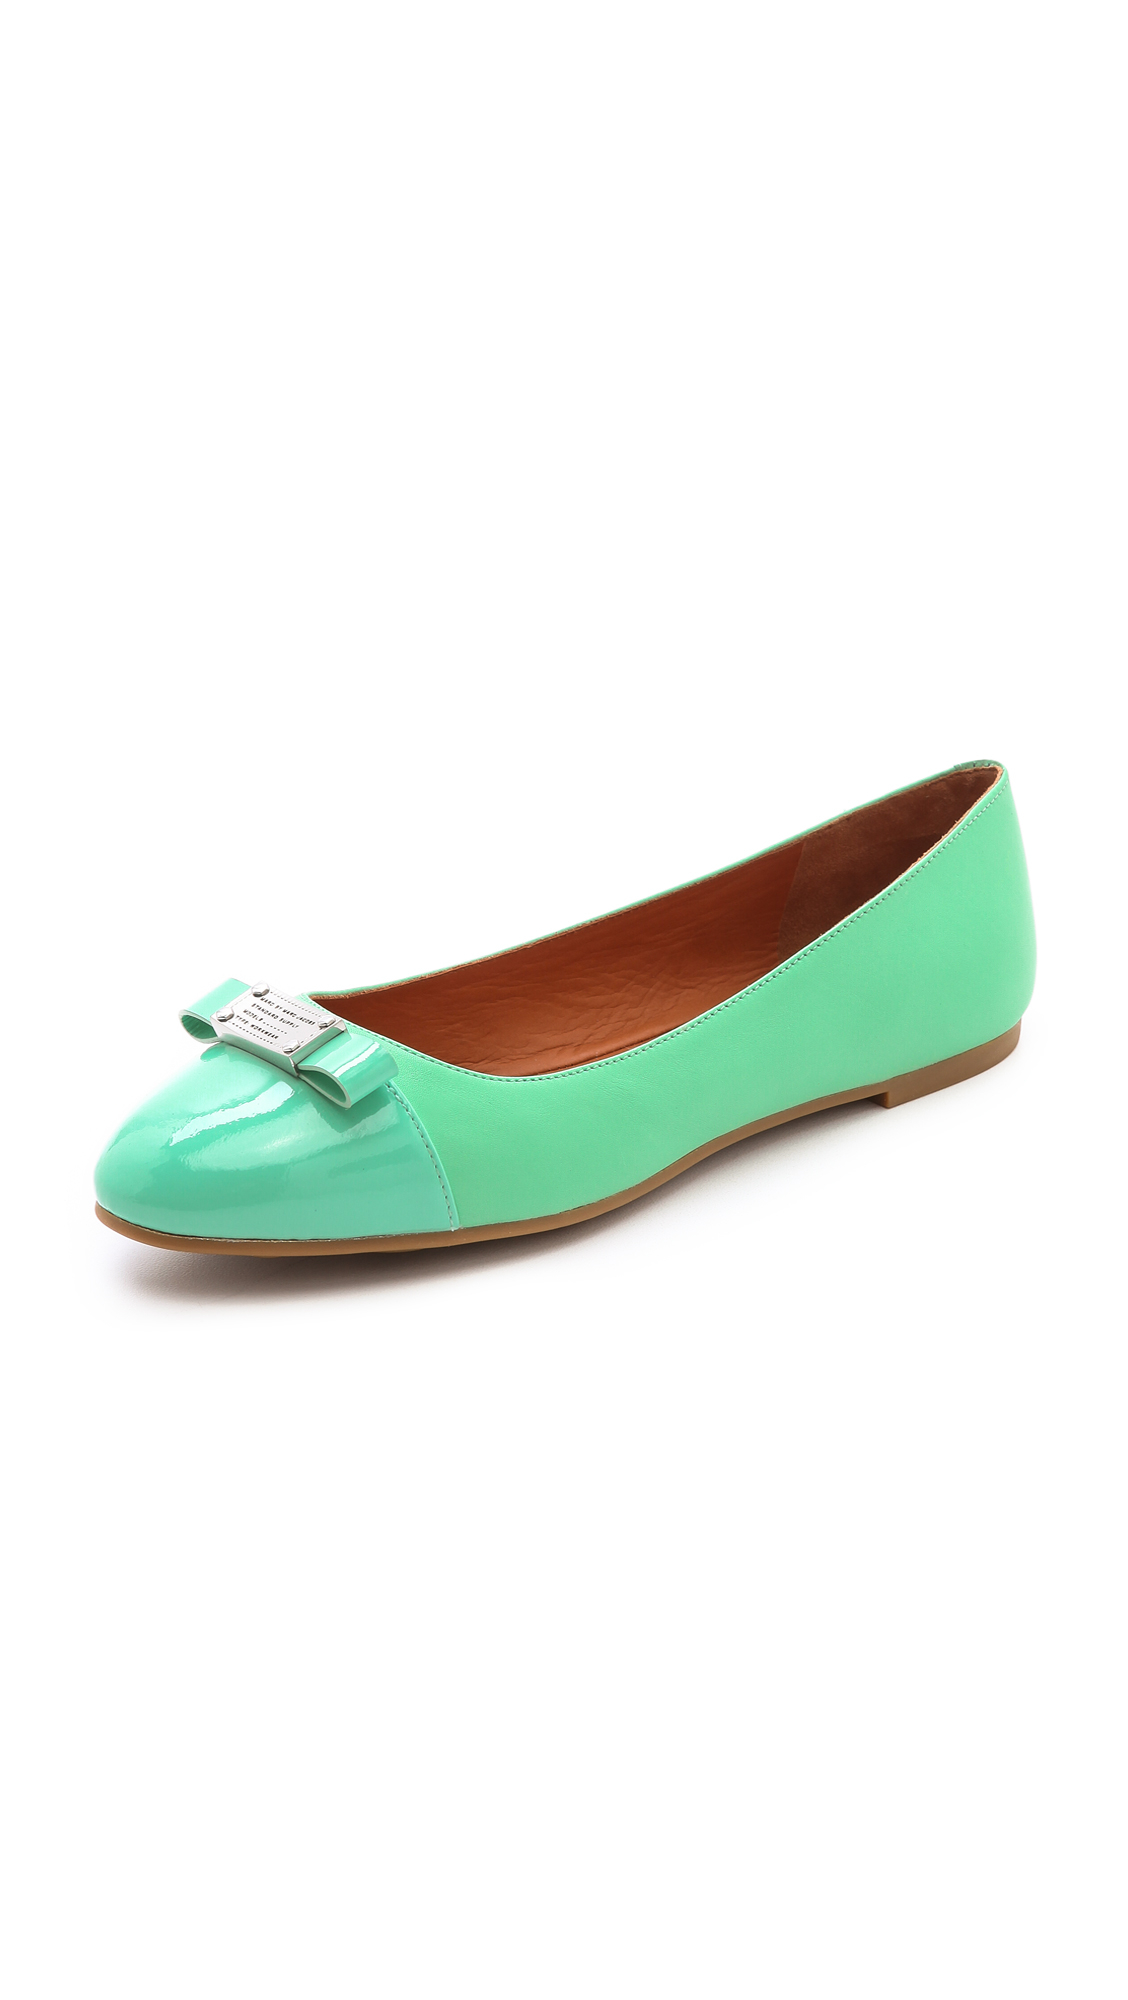 Marc by marc jacobs Tuxedo Logo Plaque Ballet Flats in Green | Lyst